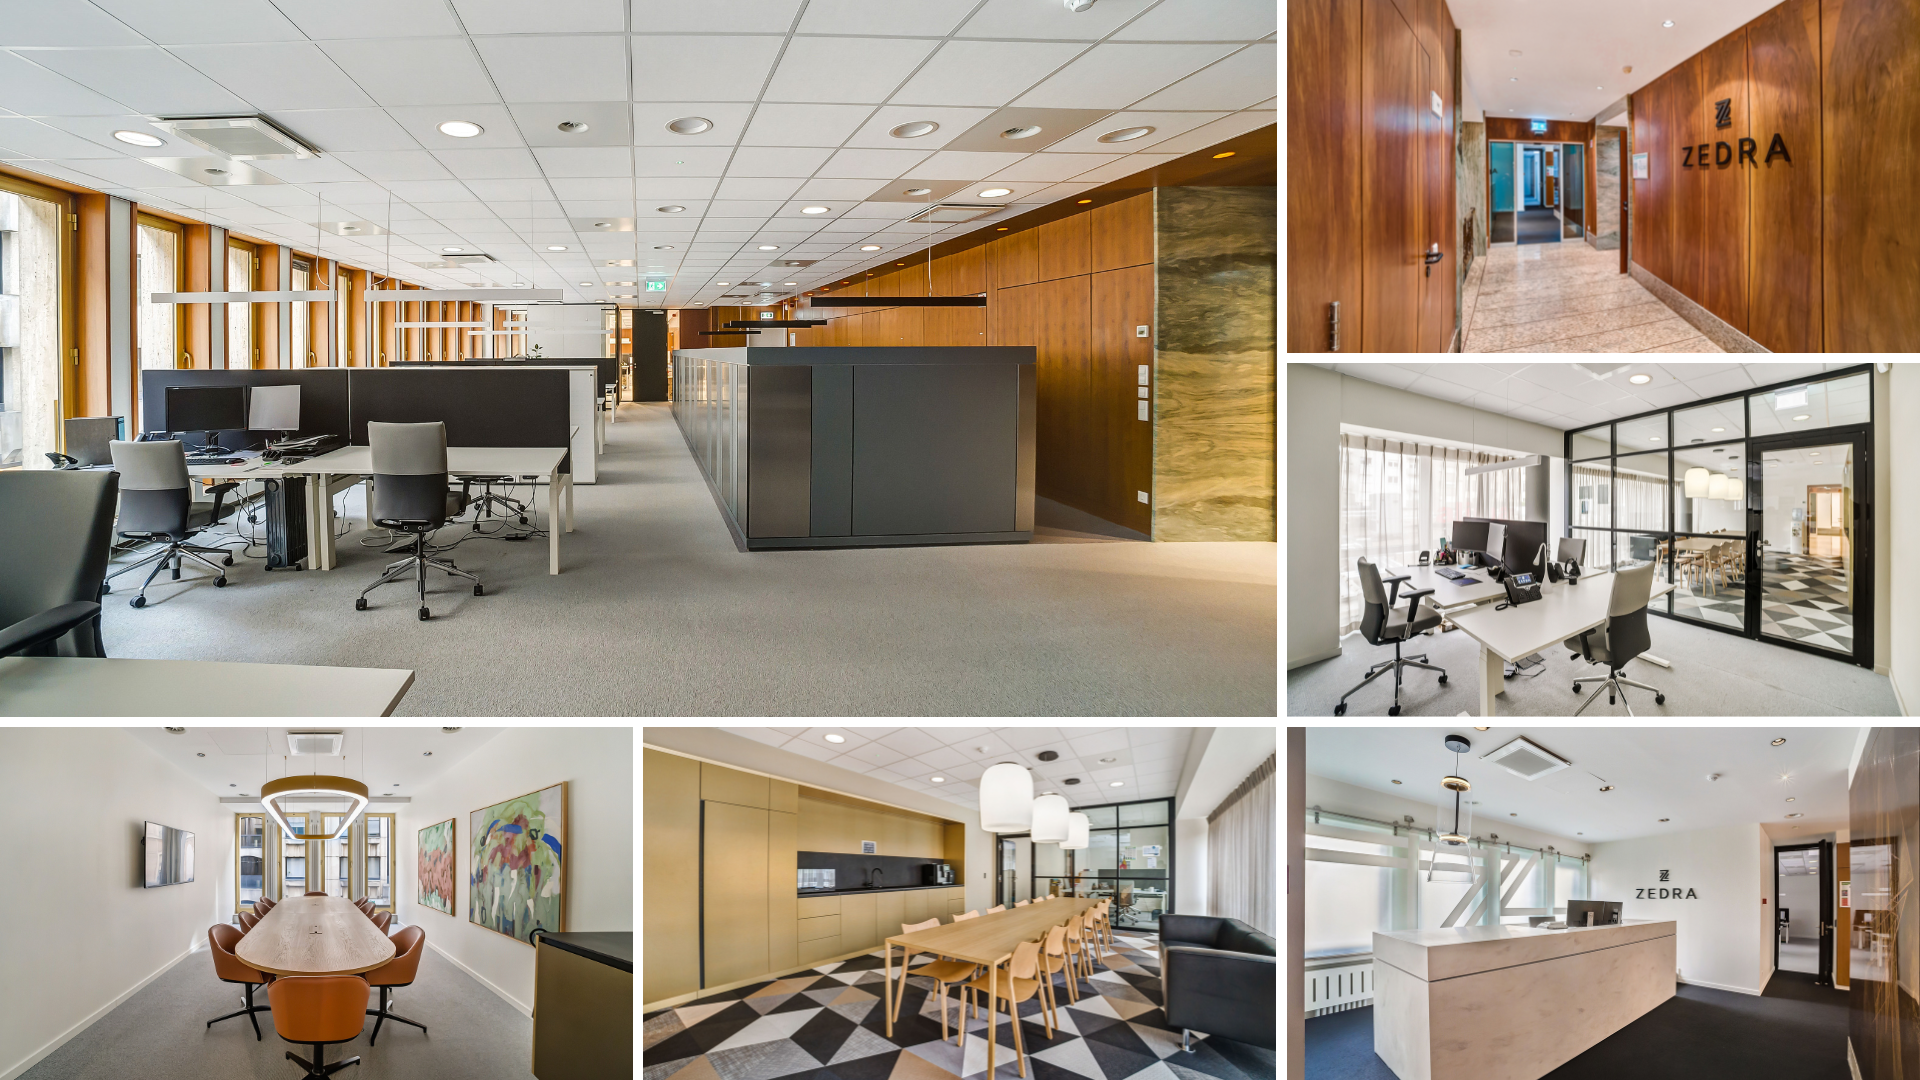 Agilité Solutions - commercial interiors project - office redesign - Zedra Office - Luxembourg stock exchange